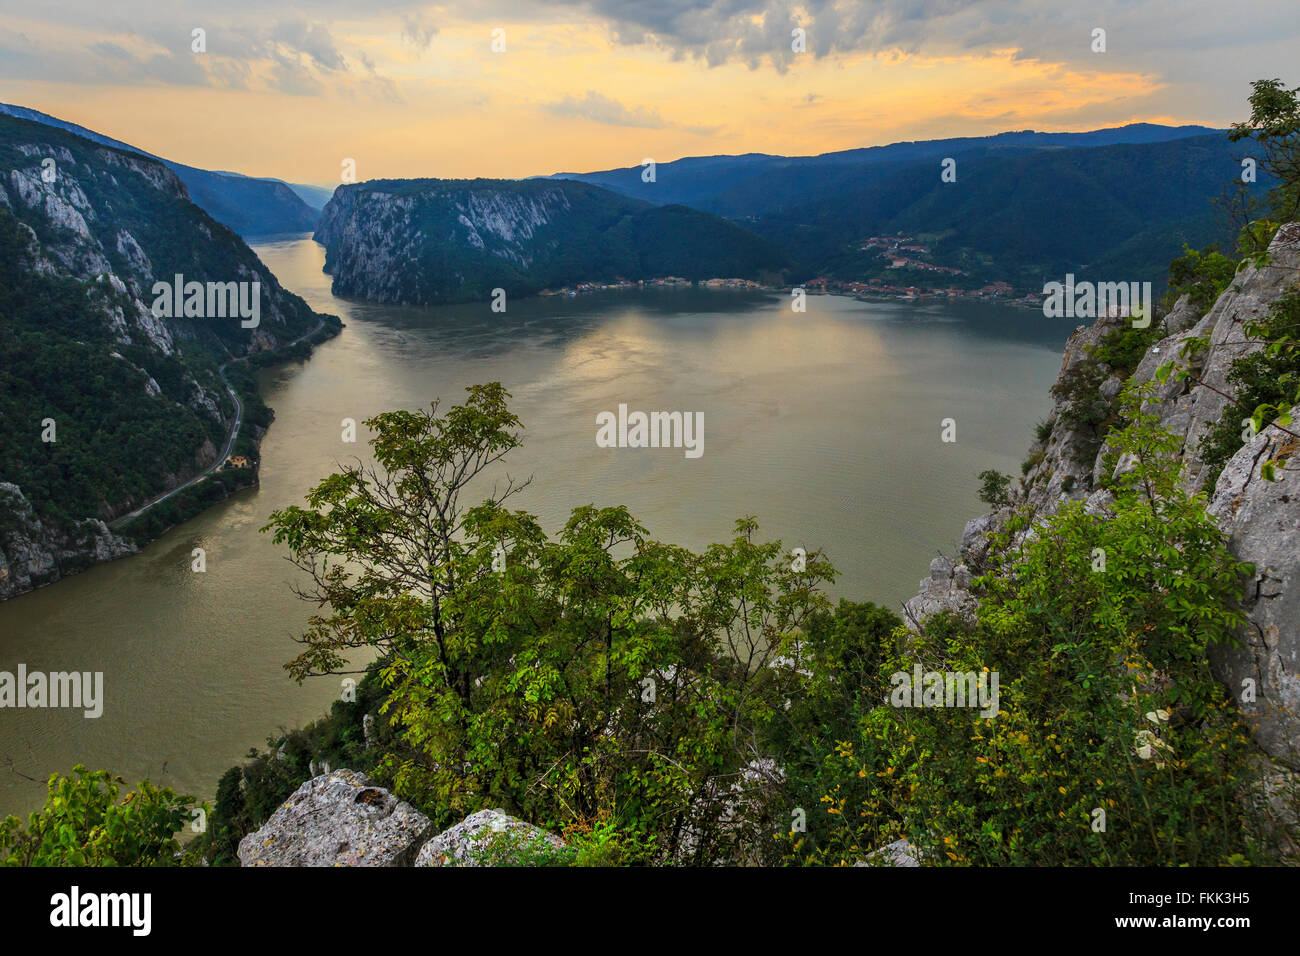 Landscape in the Danube Gorges seen from the Romanian side Stock Photo